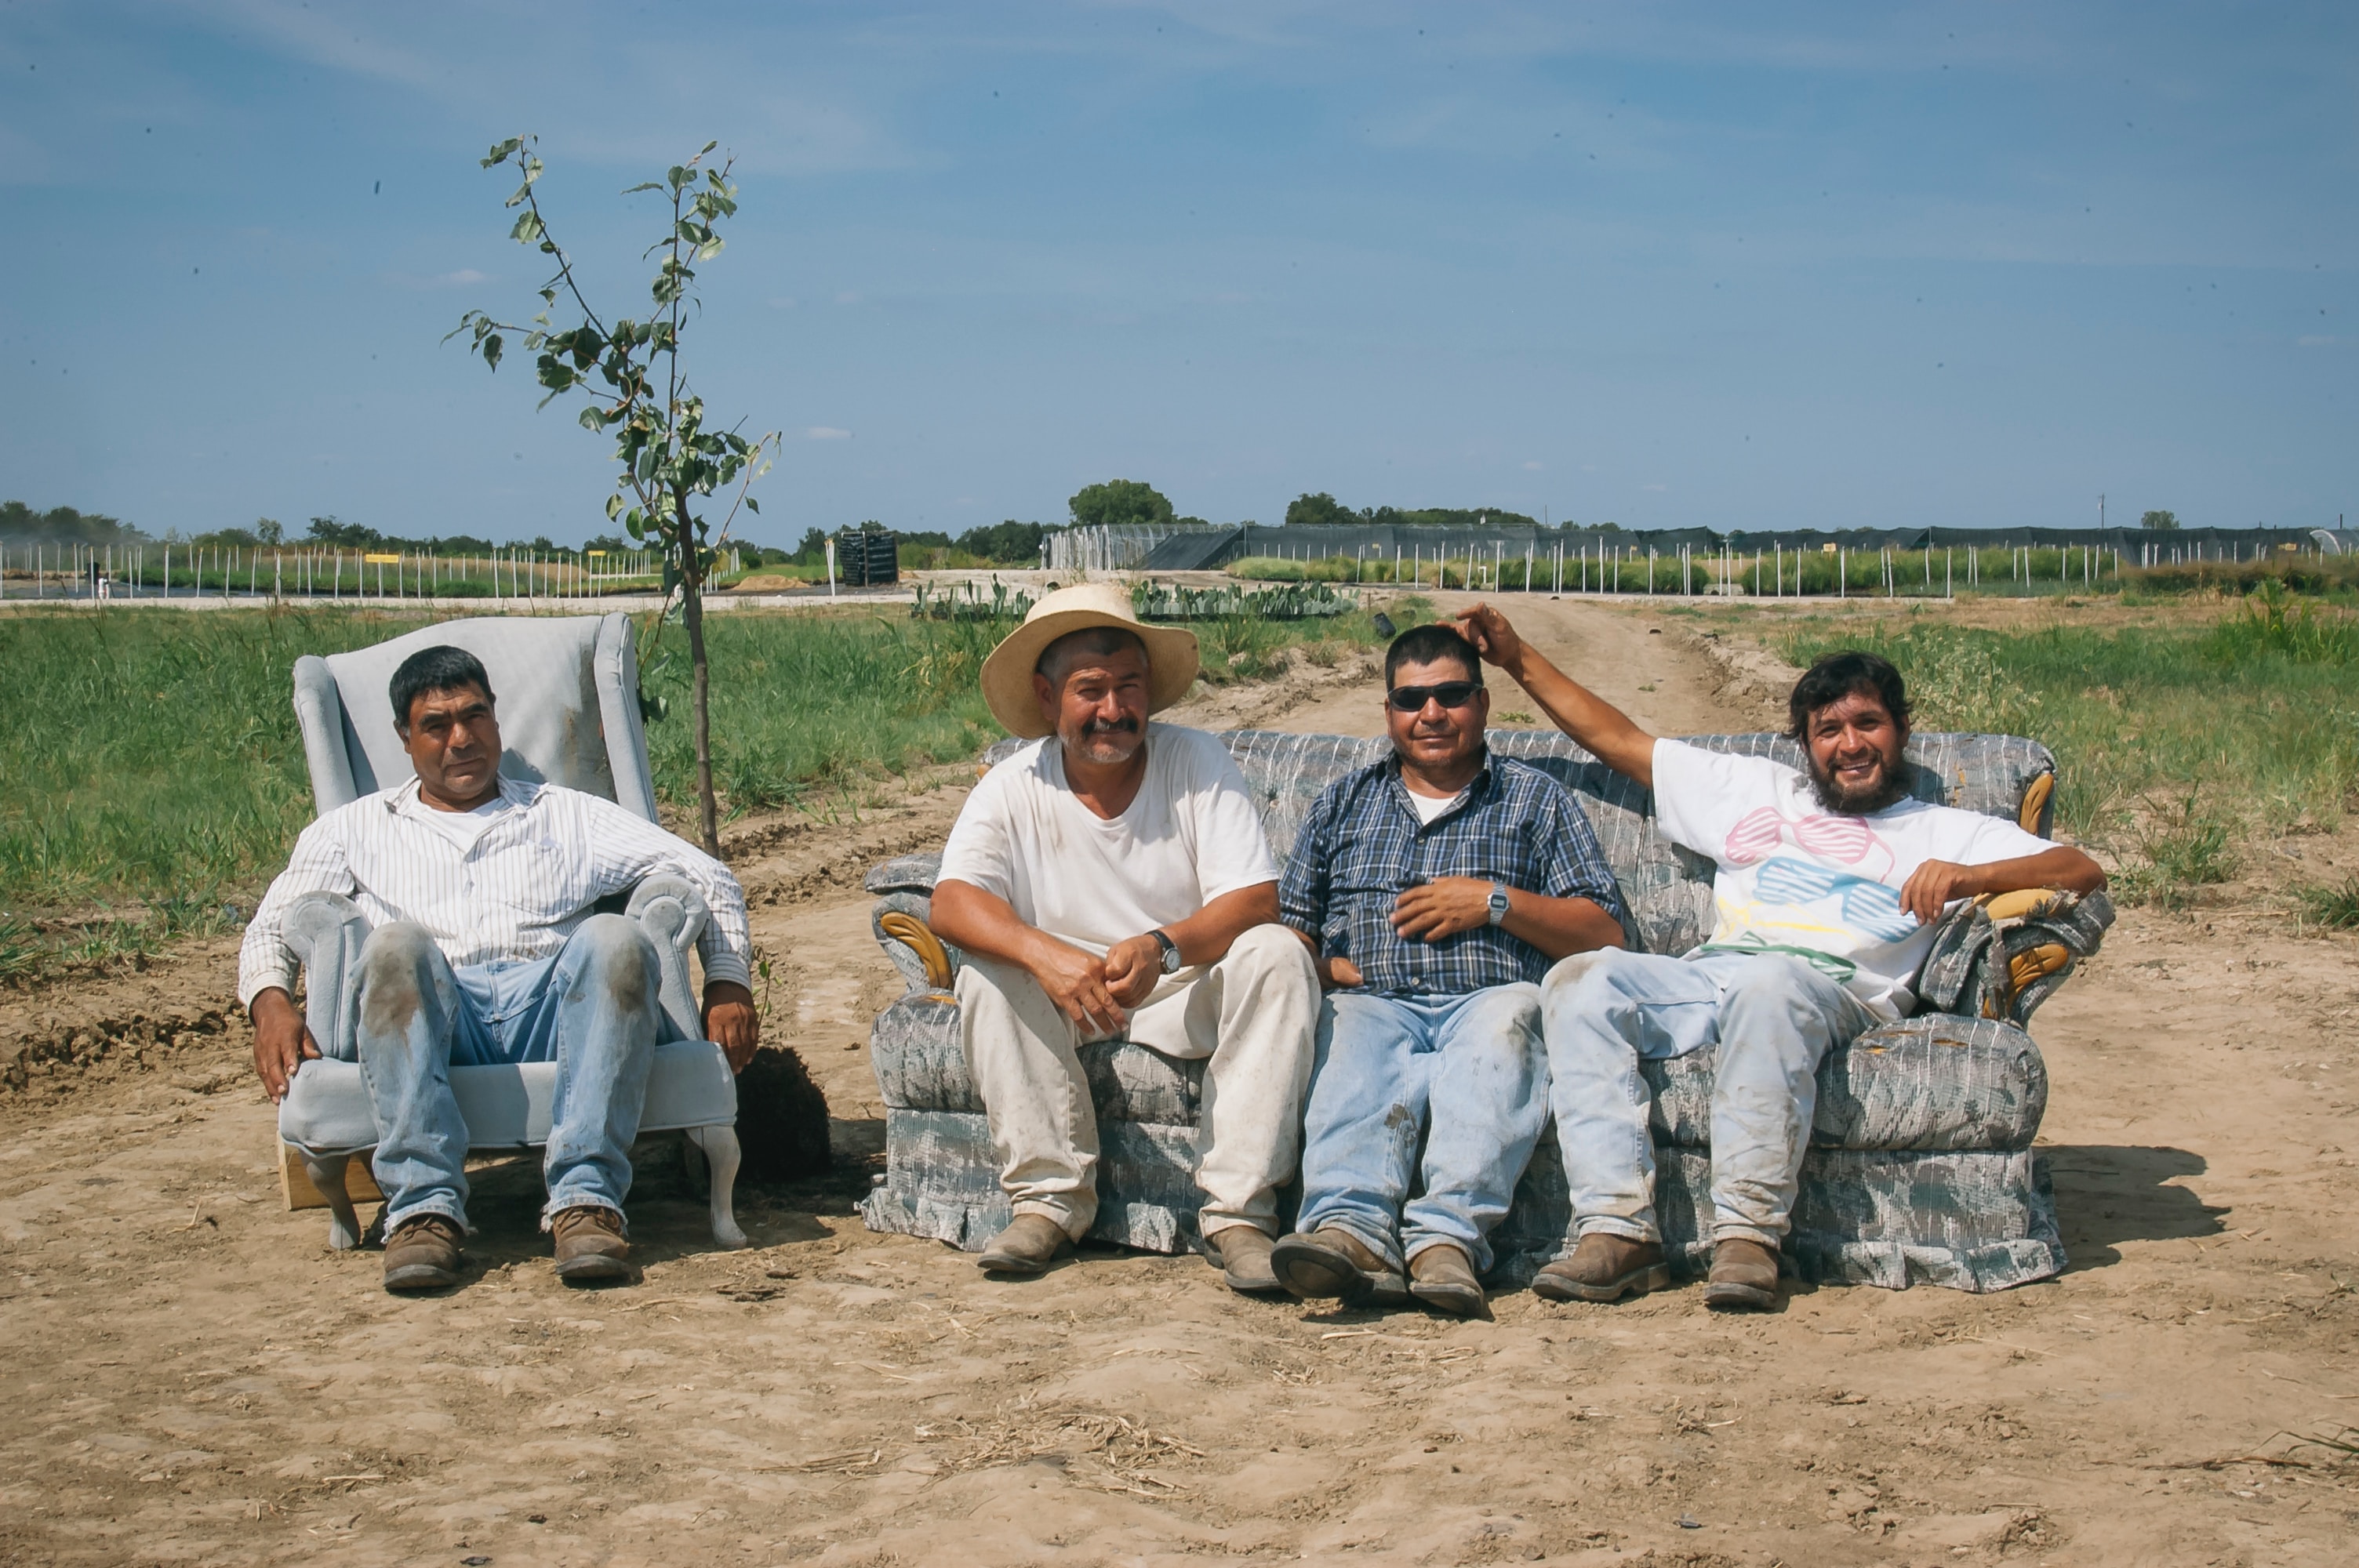 House Passes Farm Workforce Modernization Act, Creating Path to Residency for Undocumented Agricultural/Farm Workers